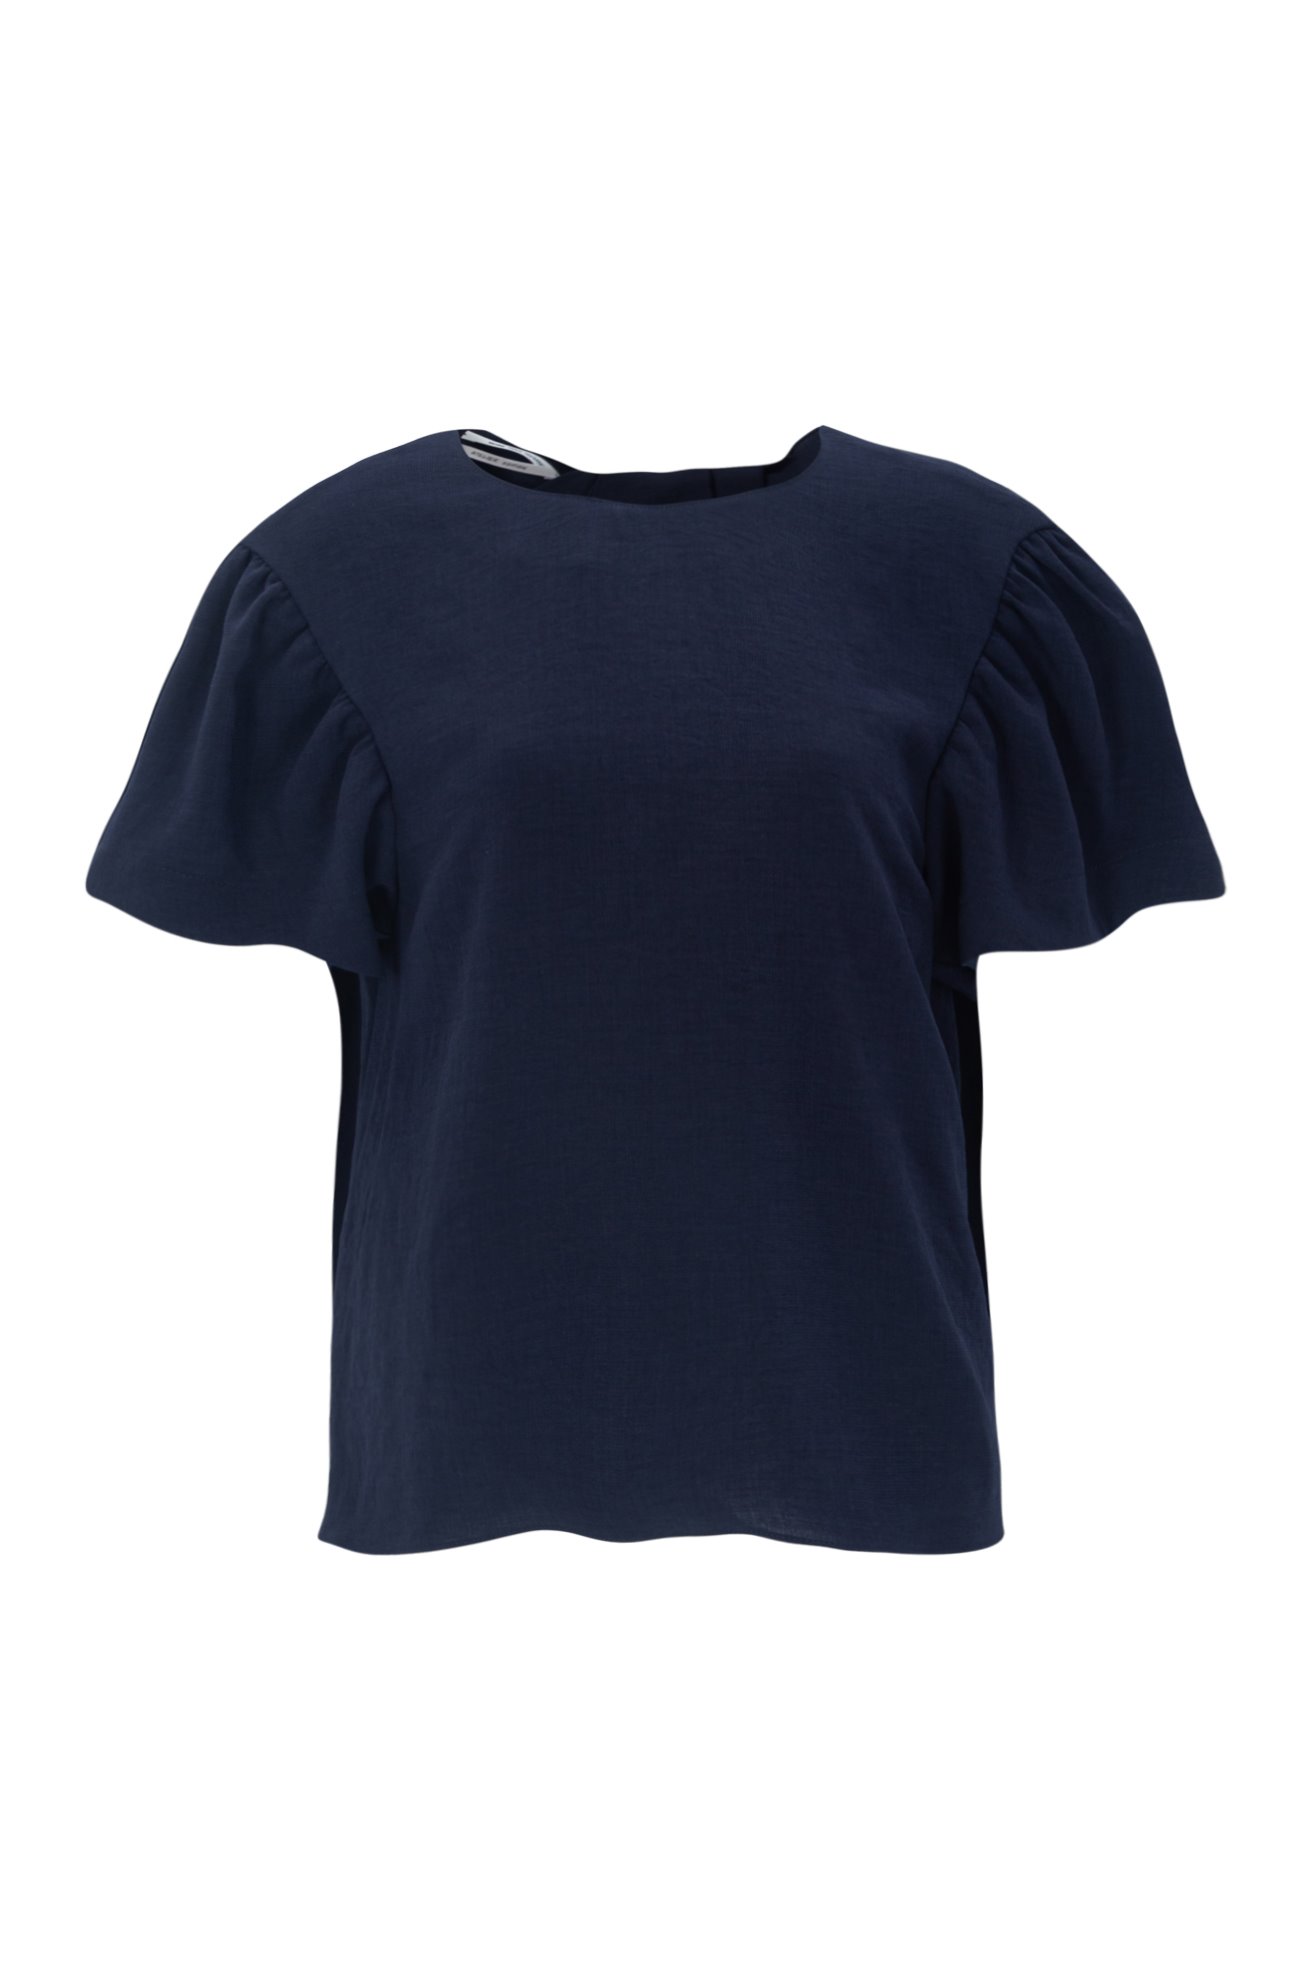 TWISTED BACK BLOUSE (NAVY)